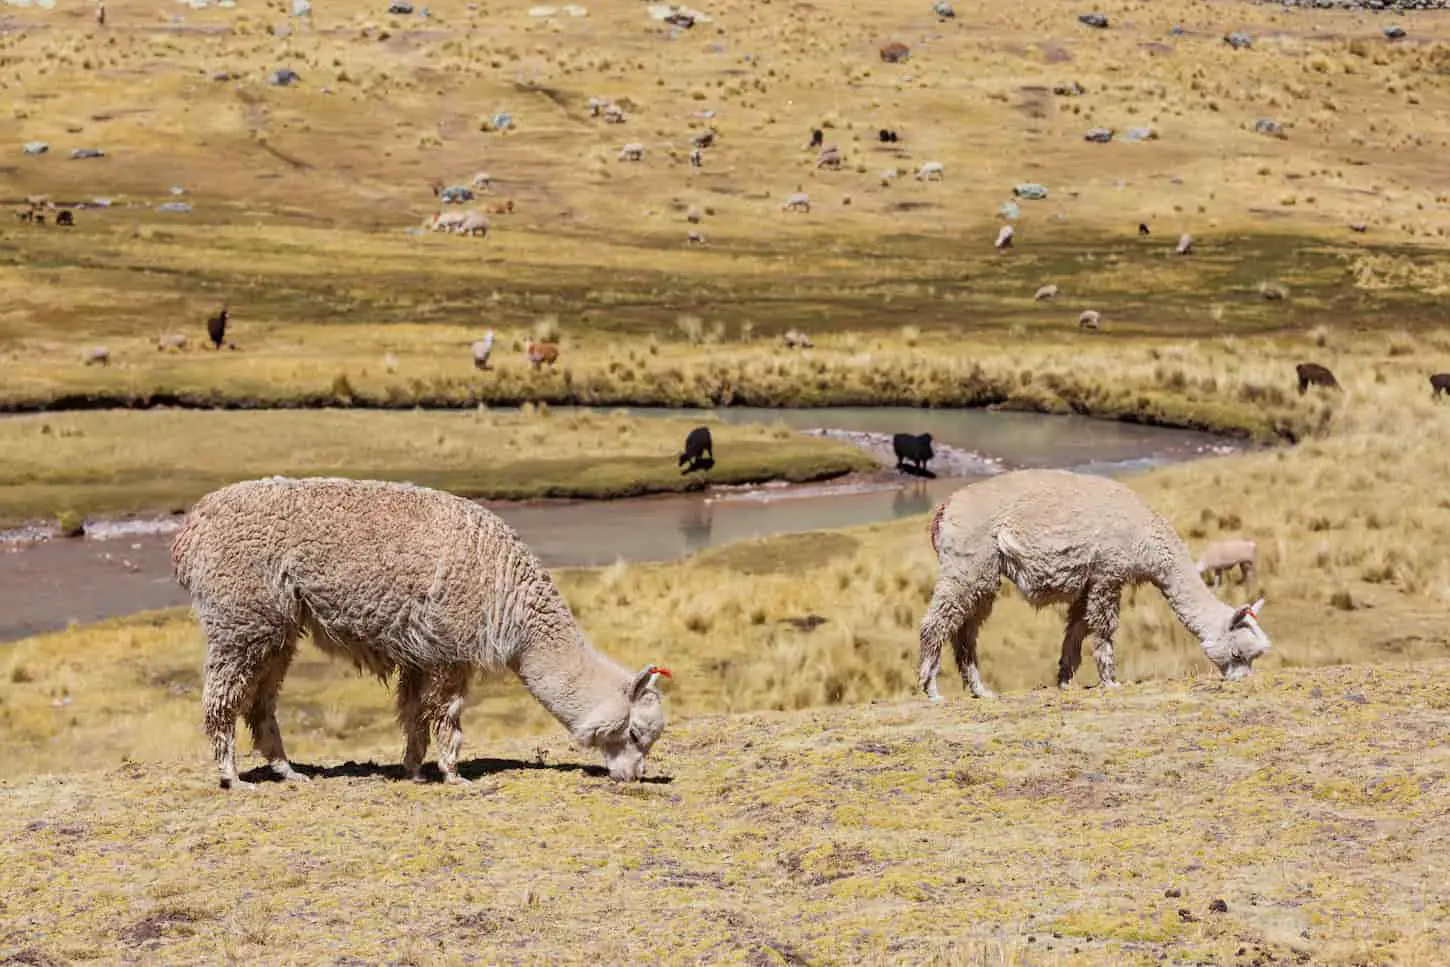 An image of Peruvian alpaca in Andes.